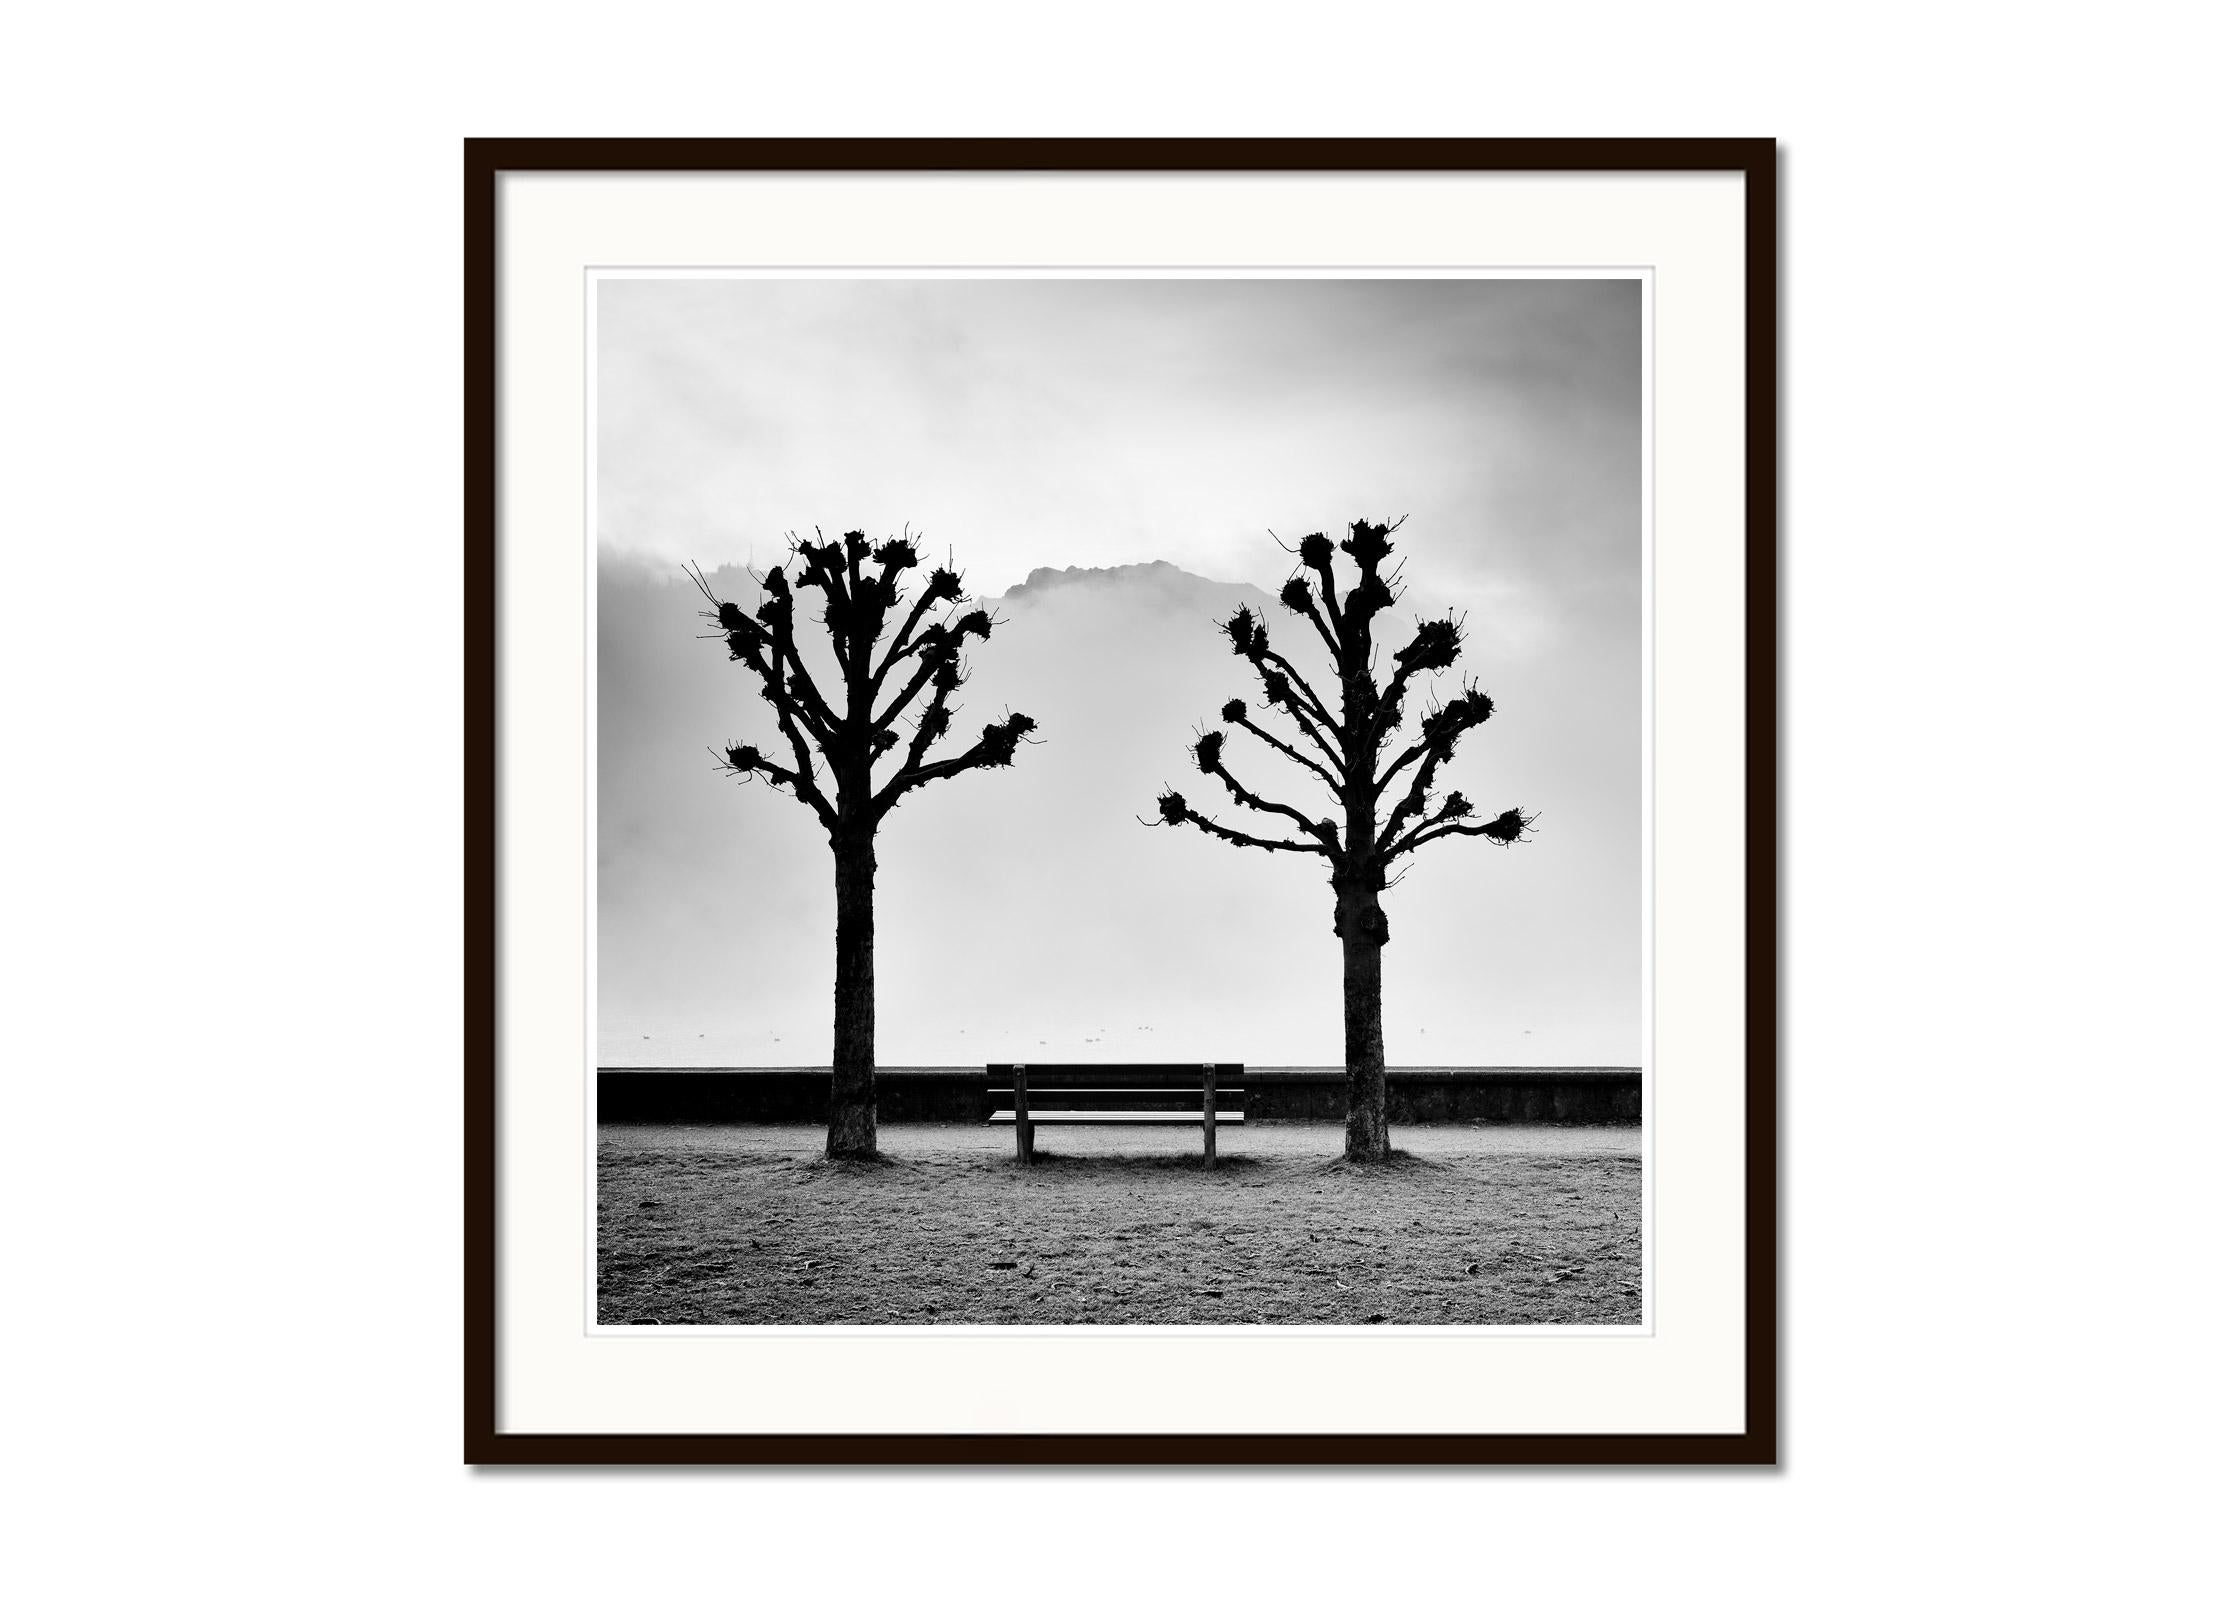 Chestnut Trees on the Promenade, Traunsee, b&w fine art photography, landscape - Gray Landscape Print by Gerald Berghammer